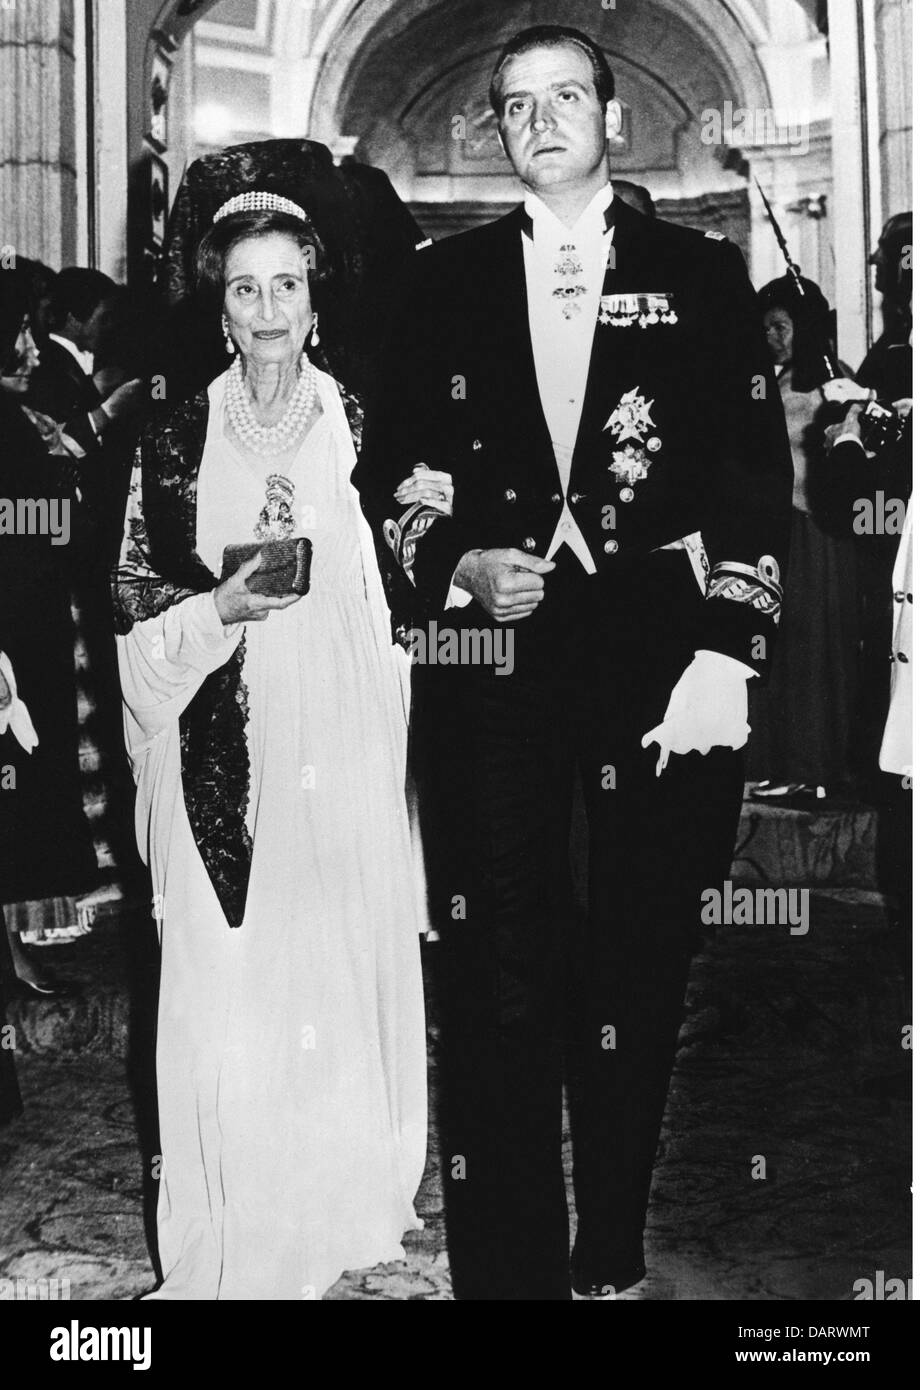 Juan Carlos I, * 5.1.1938, king of Spain since 22.11.1975, full length, with mother Maria de las Mercedes, 1980s, Stock Photo